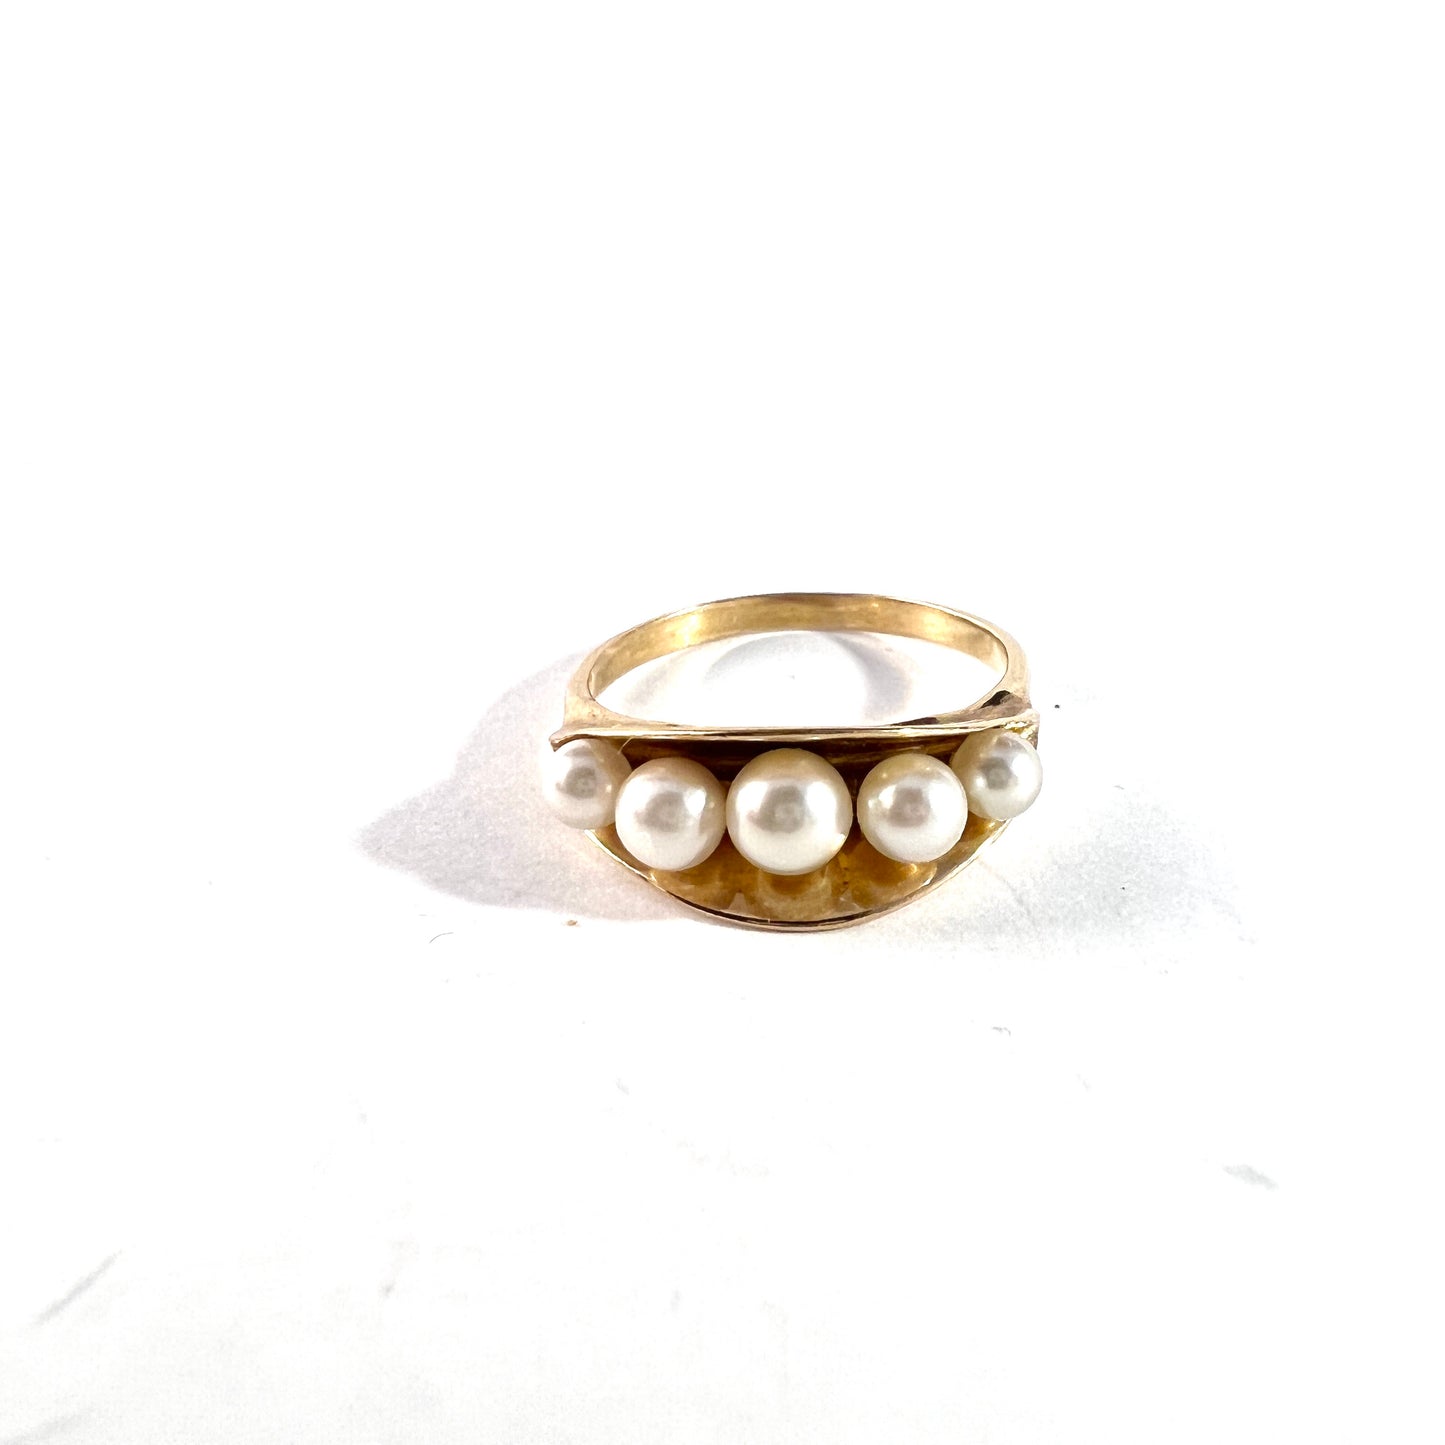 Vintage Mid Century 18k Gold Pearl Ring. Possibly France.